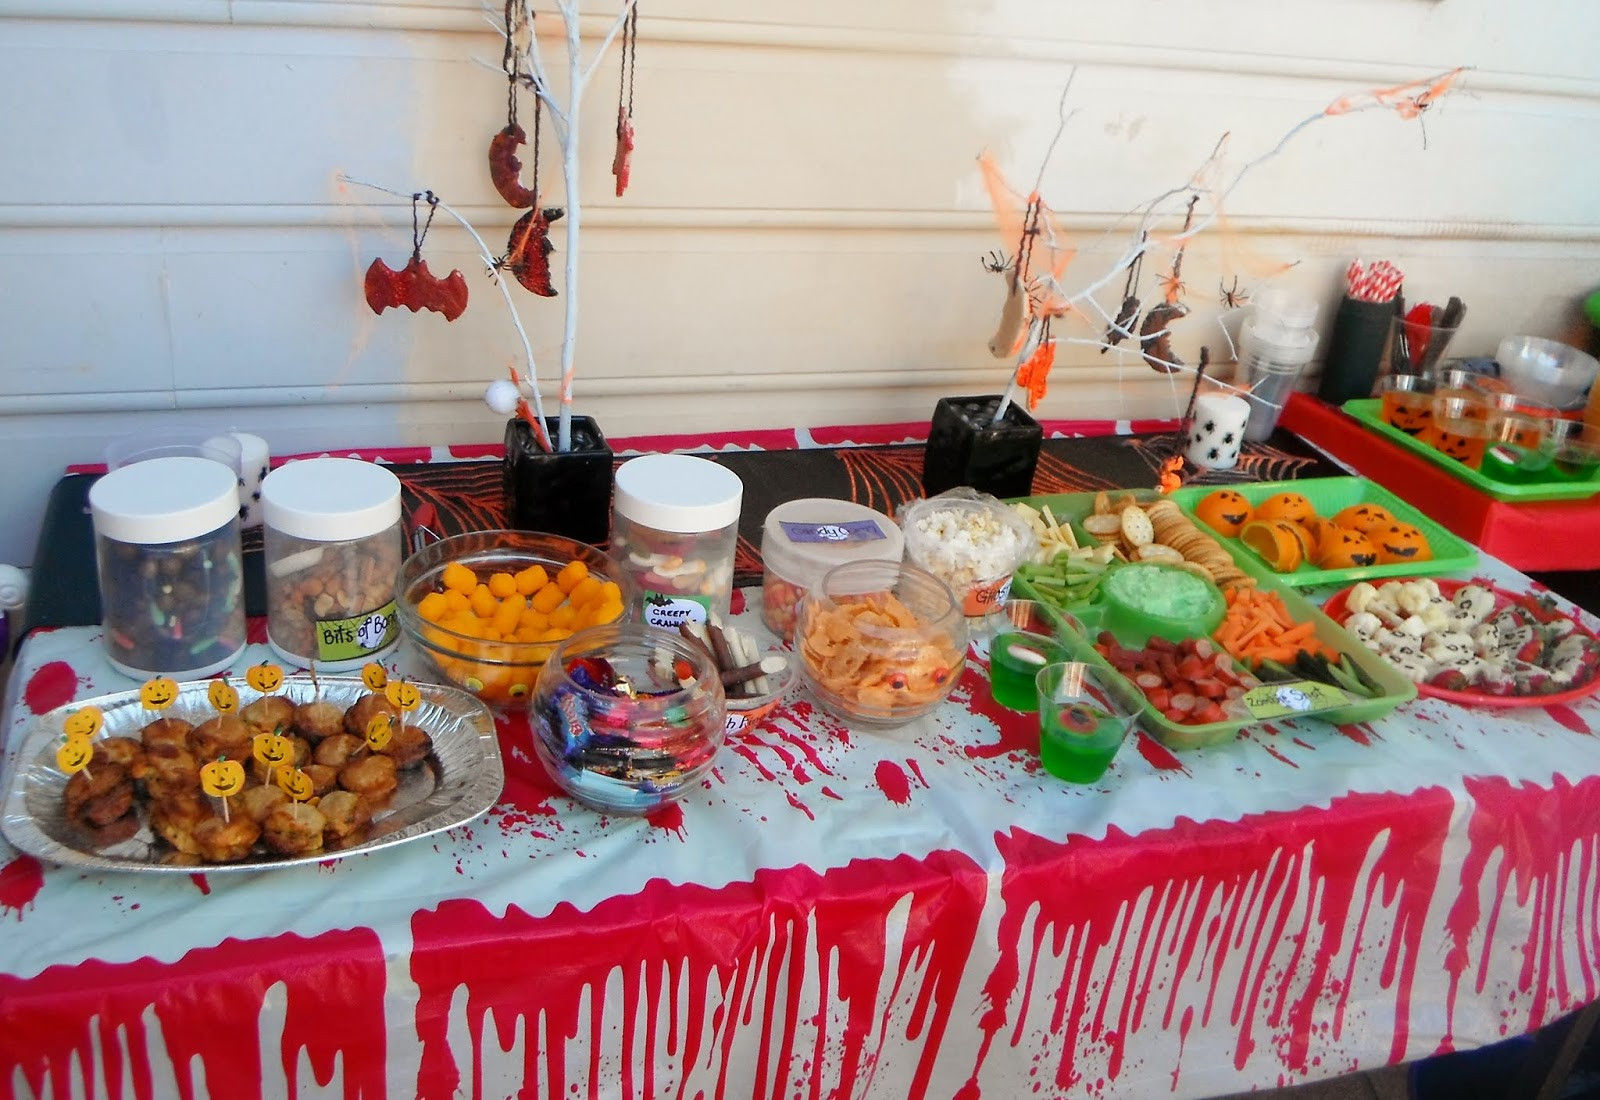 Halloween Home Party Ideas
 Adventures at home with Mum Halloween Party Food